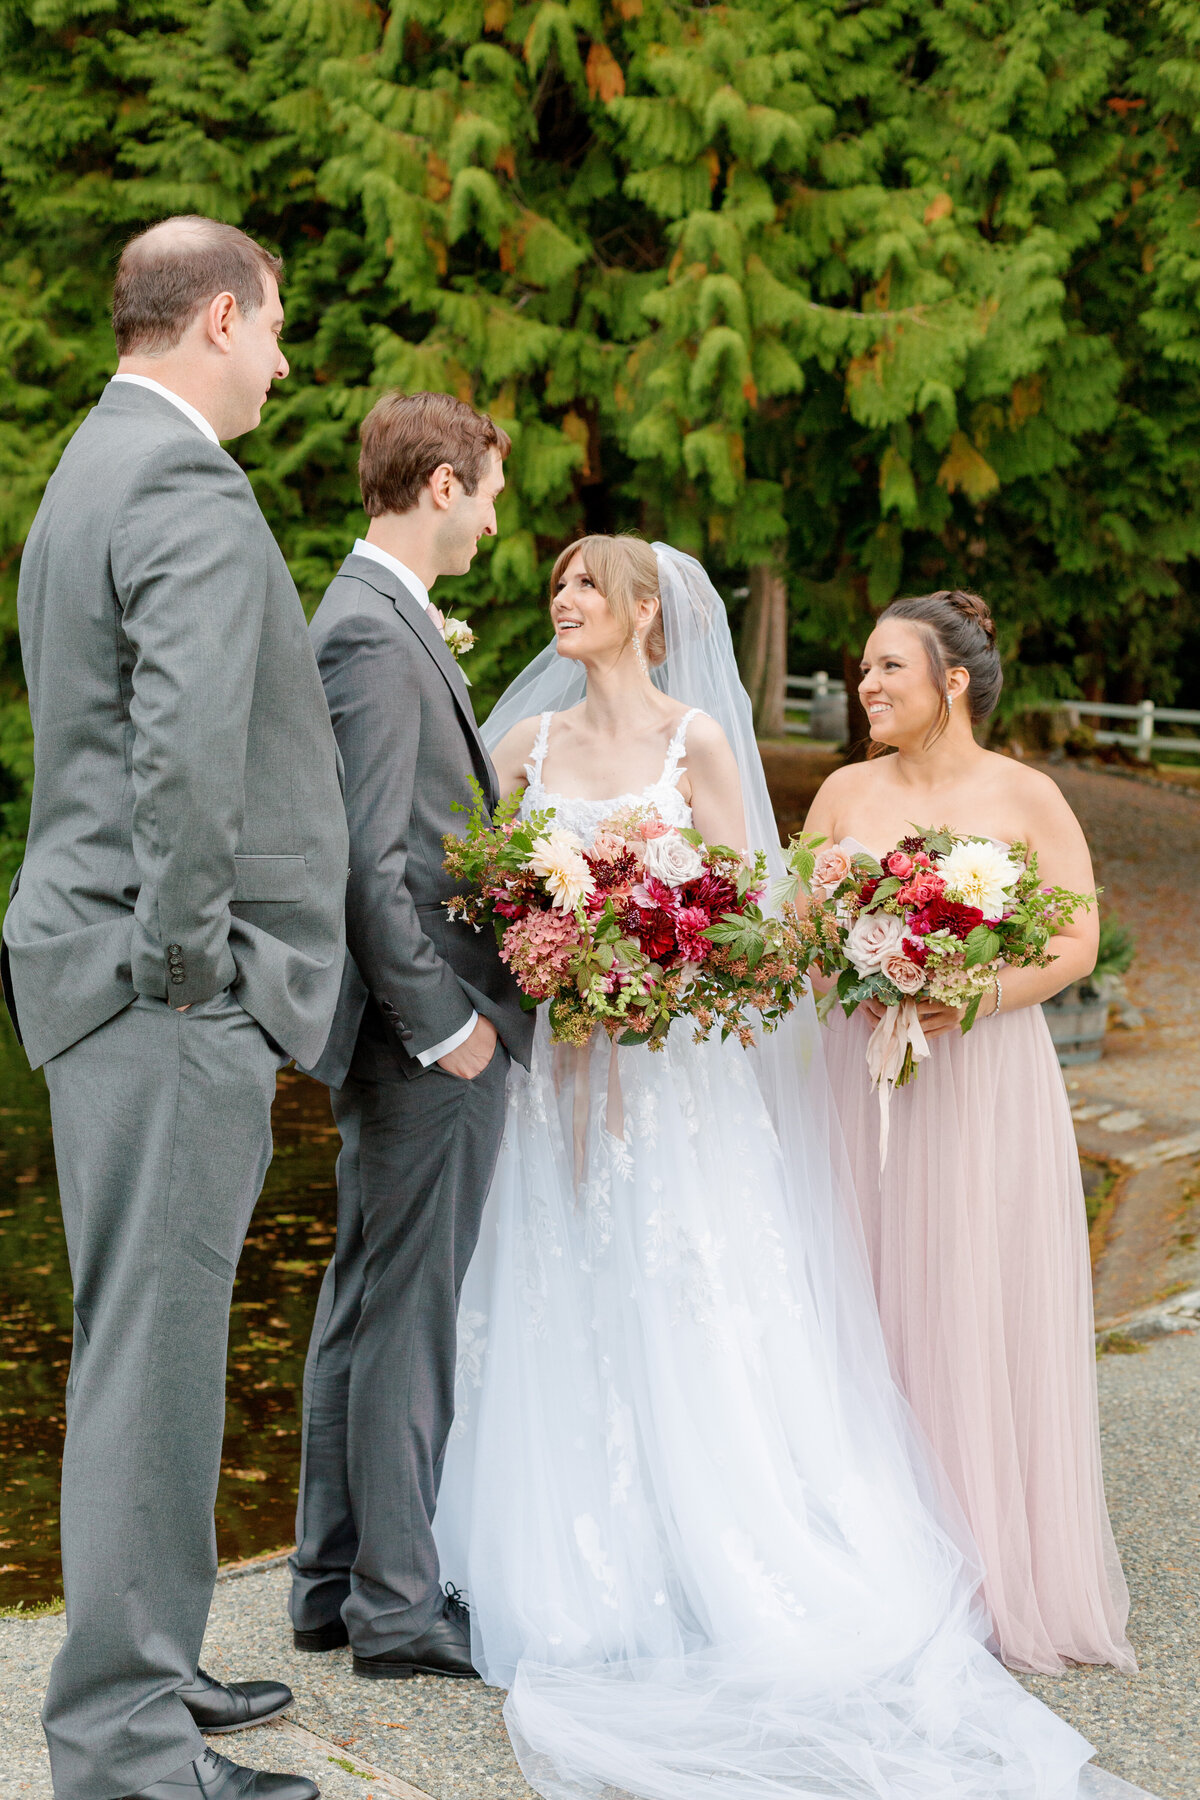 4 - Ashlie & William - Chateau Lill Wedding - Kerry Jeanne Photography  (9)